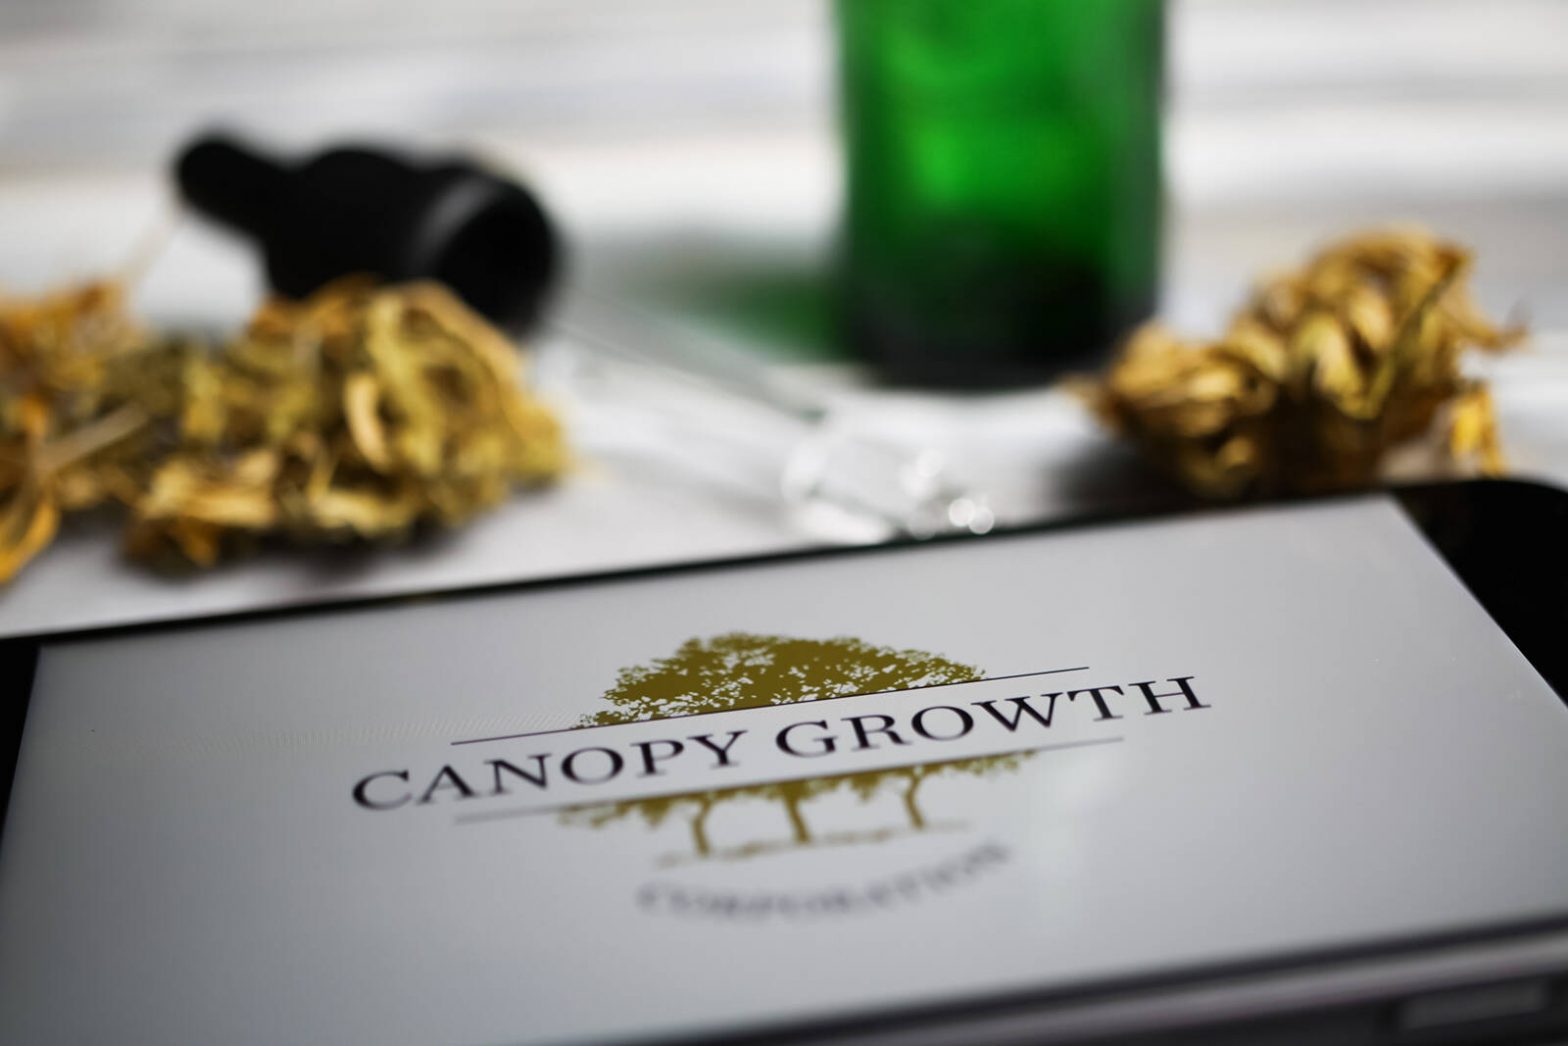 Canopy Growth to Purchase Wana Brands in a $300M Deal